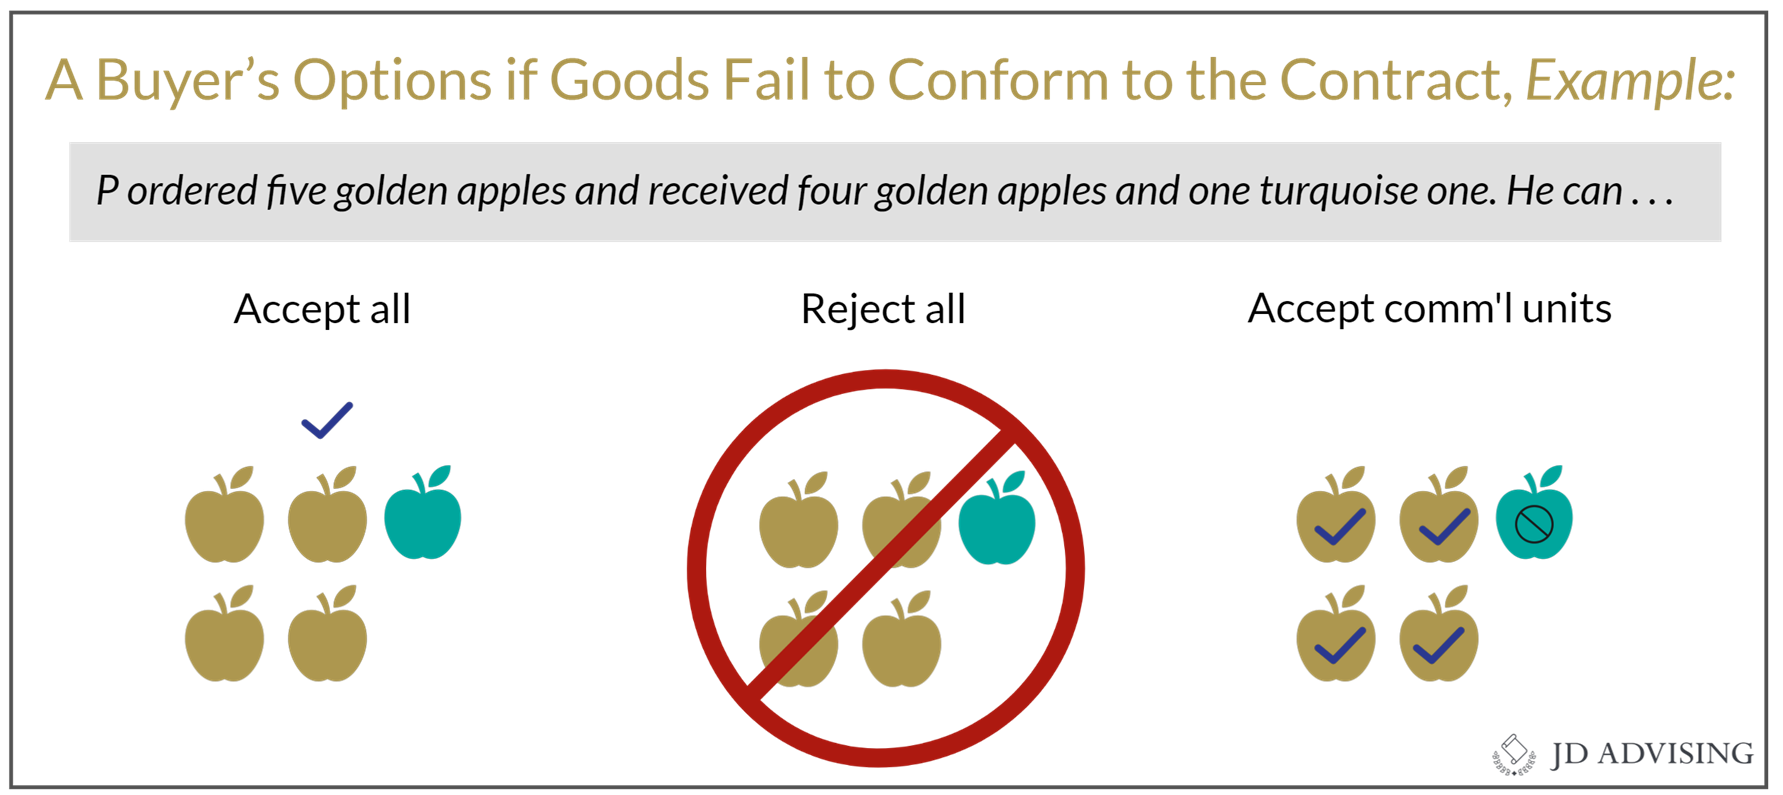 A Buyer's Option if goods fail to conform to the contract, example